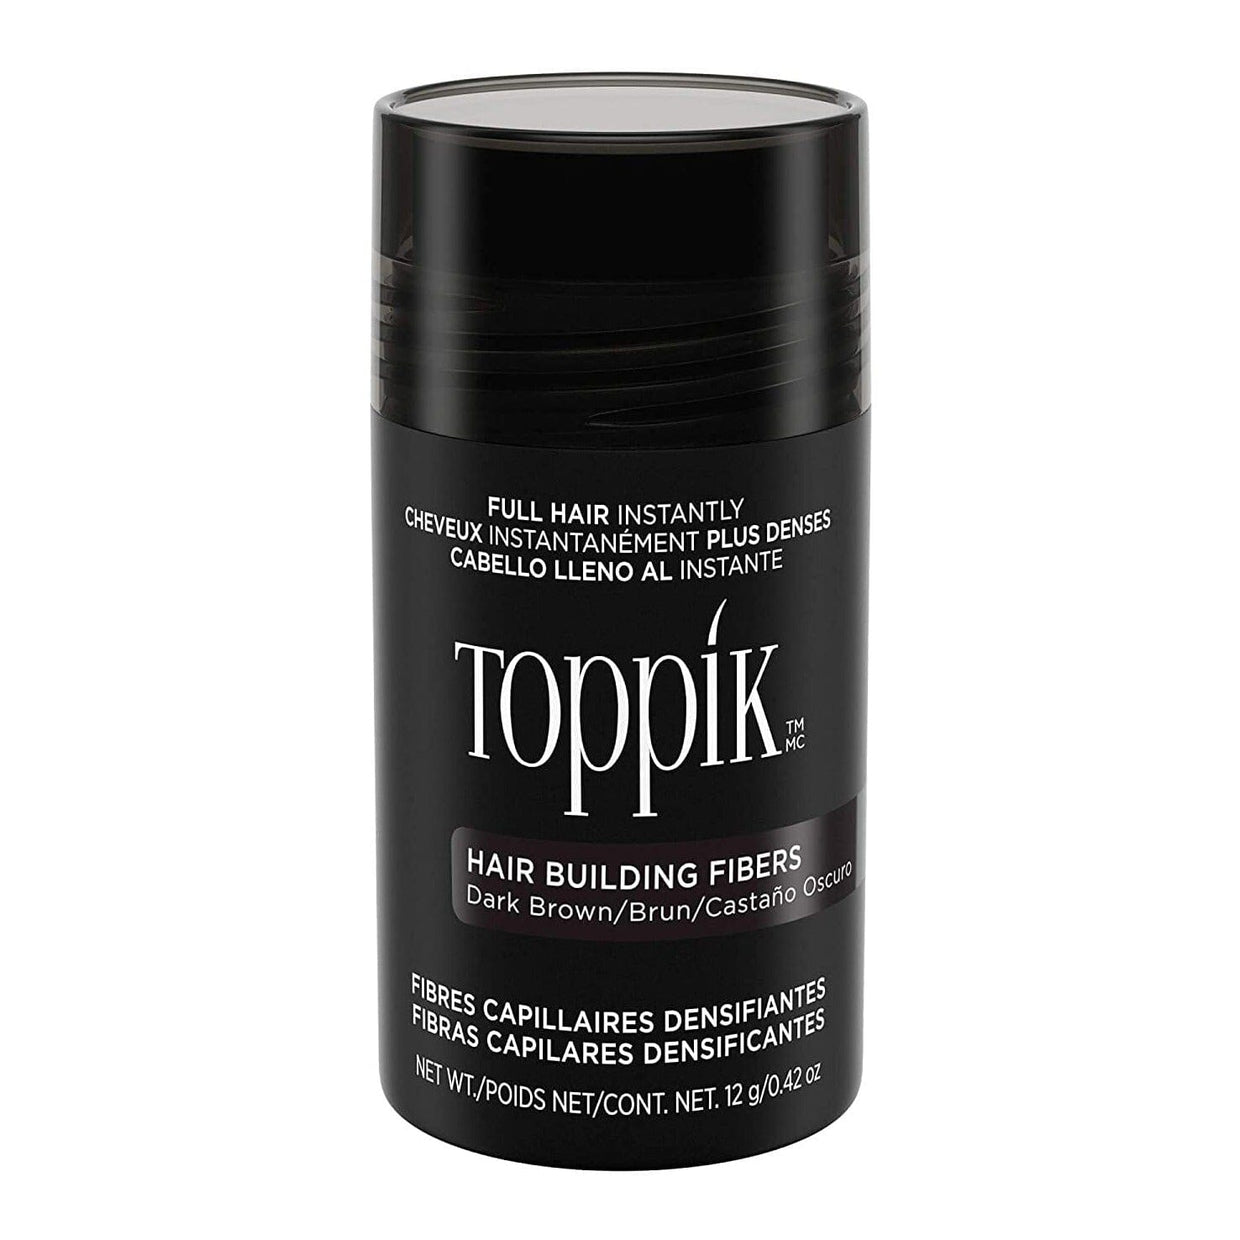 Toppik Hair Building Fibers - DARK BROWN Hair Styling Products Toppik 0.42 oz Shop at Exclusive Beauty Club